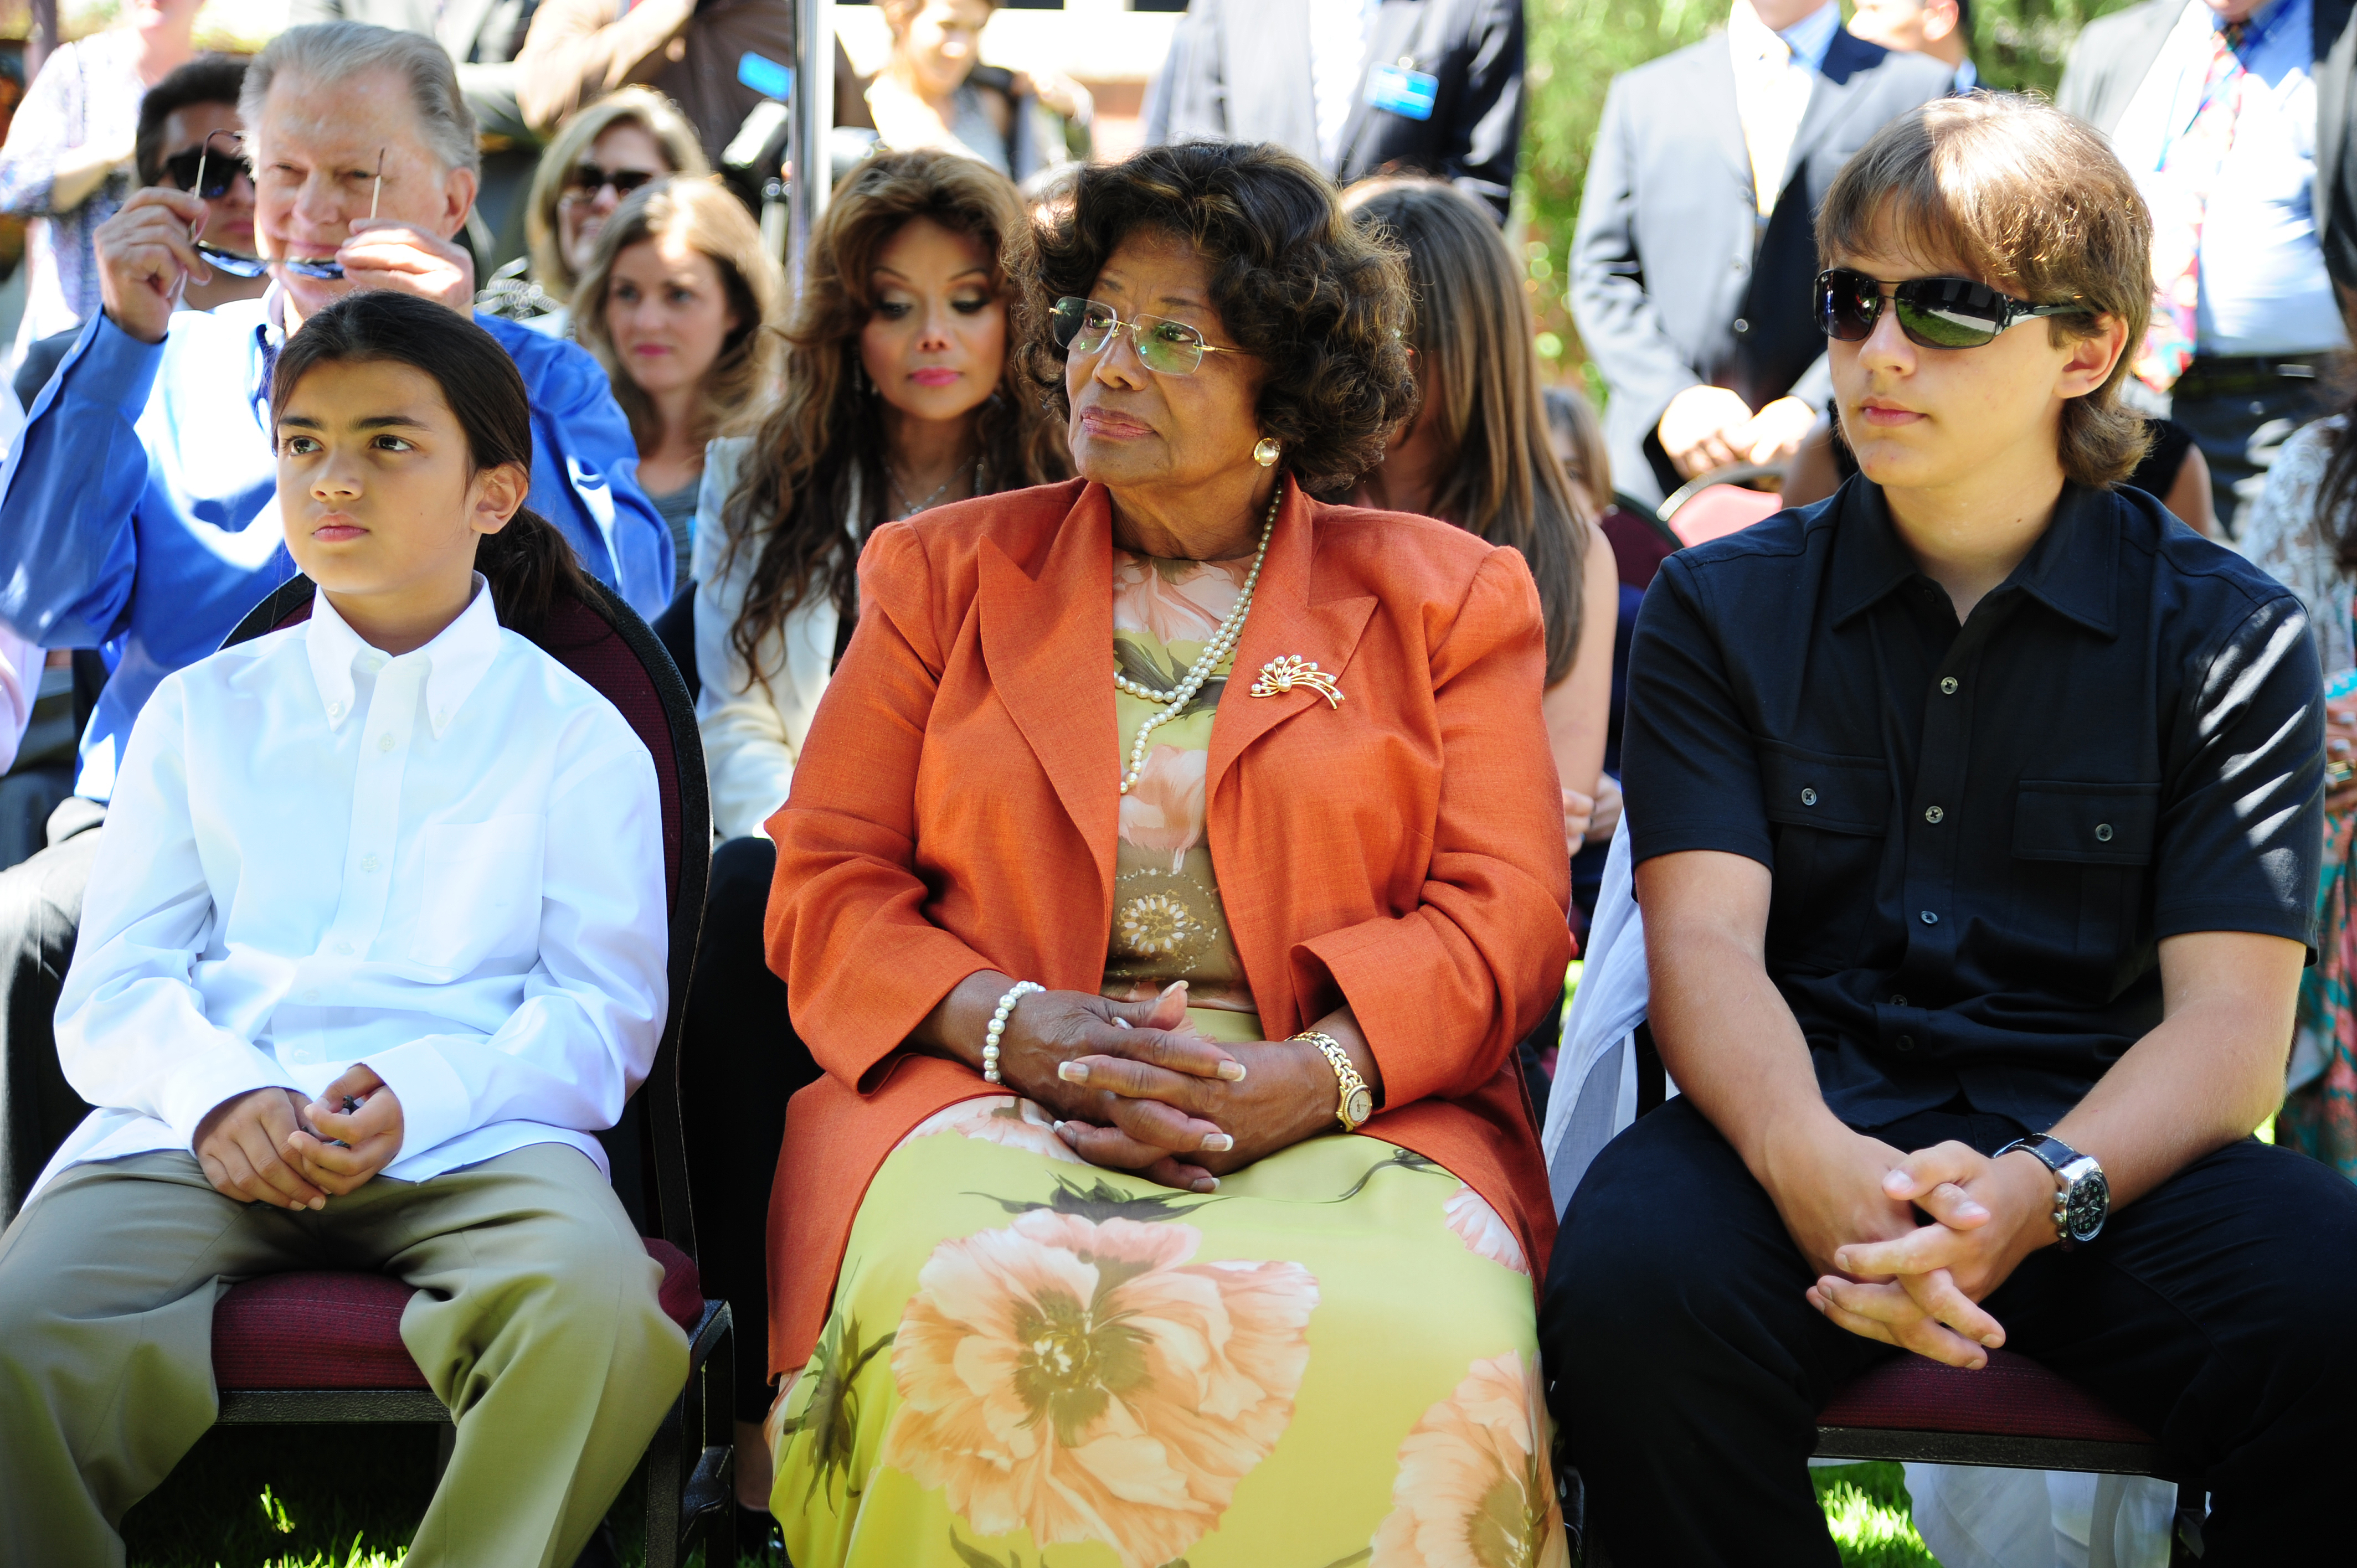 Blanket, Katherine, and Prince Jackson at a Children's Hospital Artwork Donation ceremony honoring Michael Jackson in Los Angeles, California on August 8, 2011 | Source: Getty Images